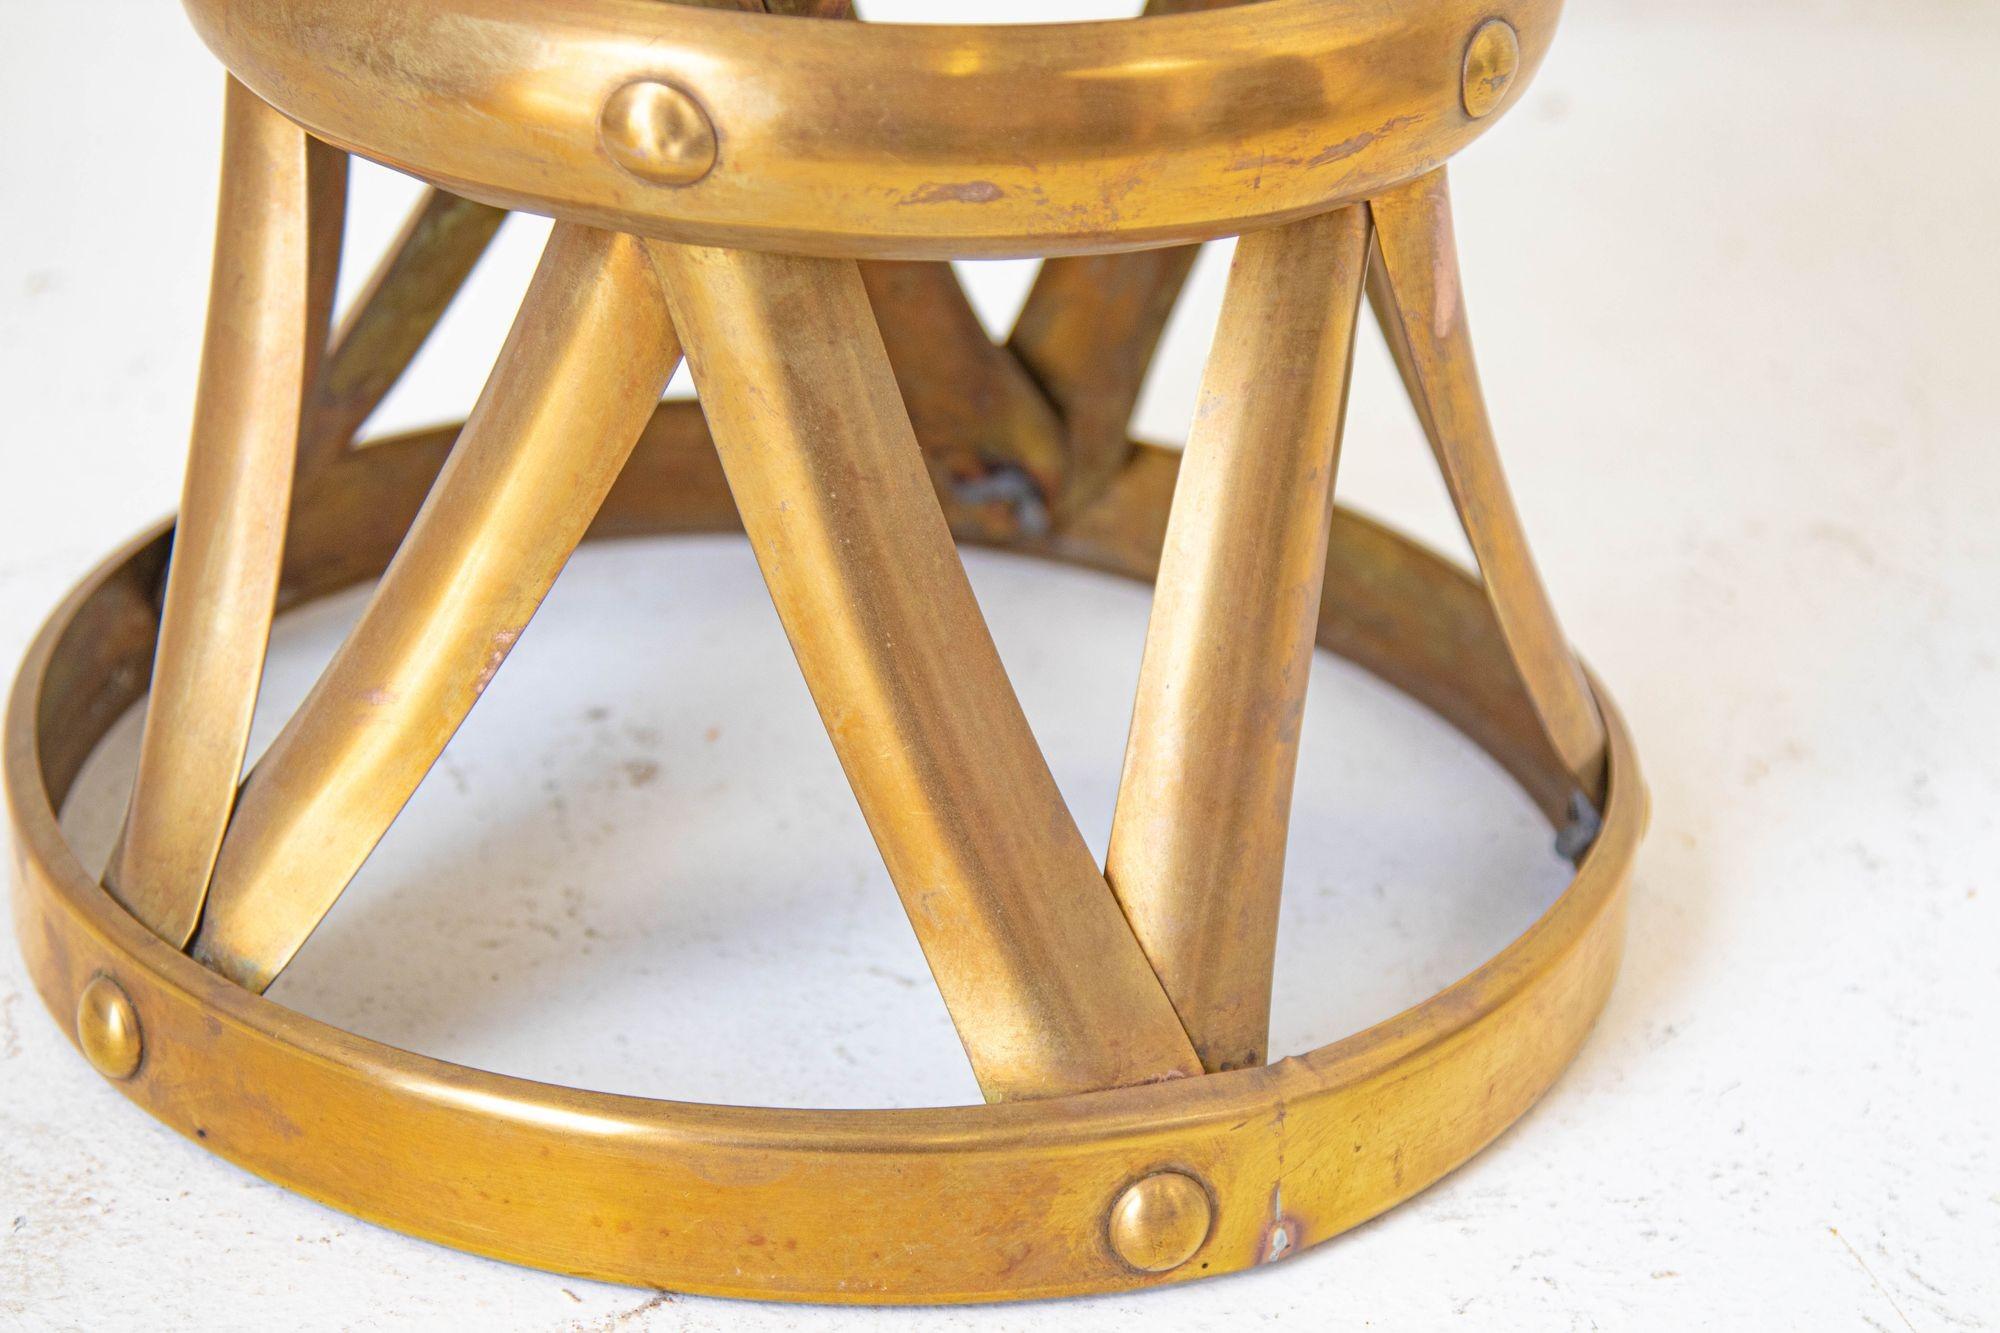 Hand-Crafted Midcentury Vintage Polished Brass Drum Stool or Side Table, 1960s For Sale